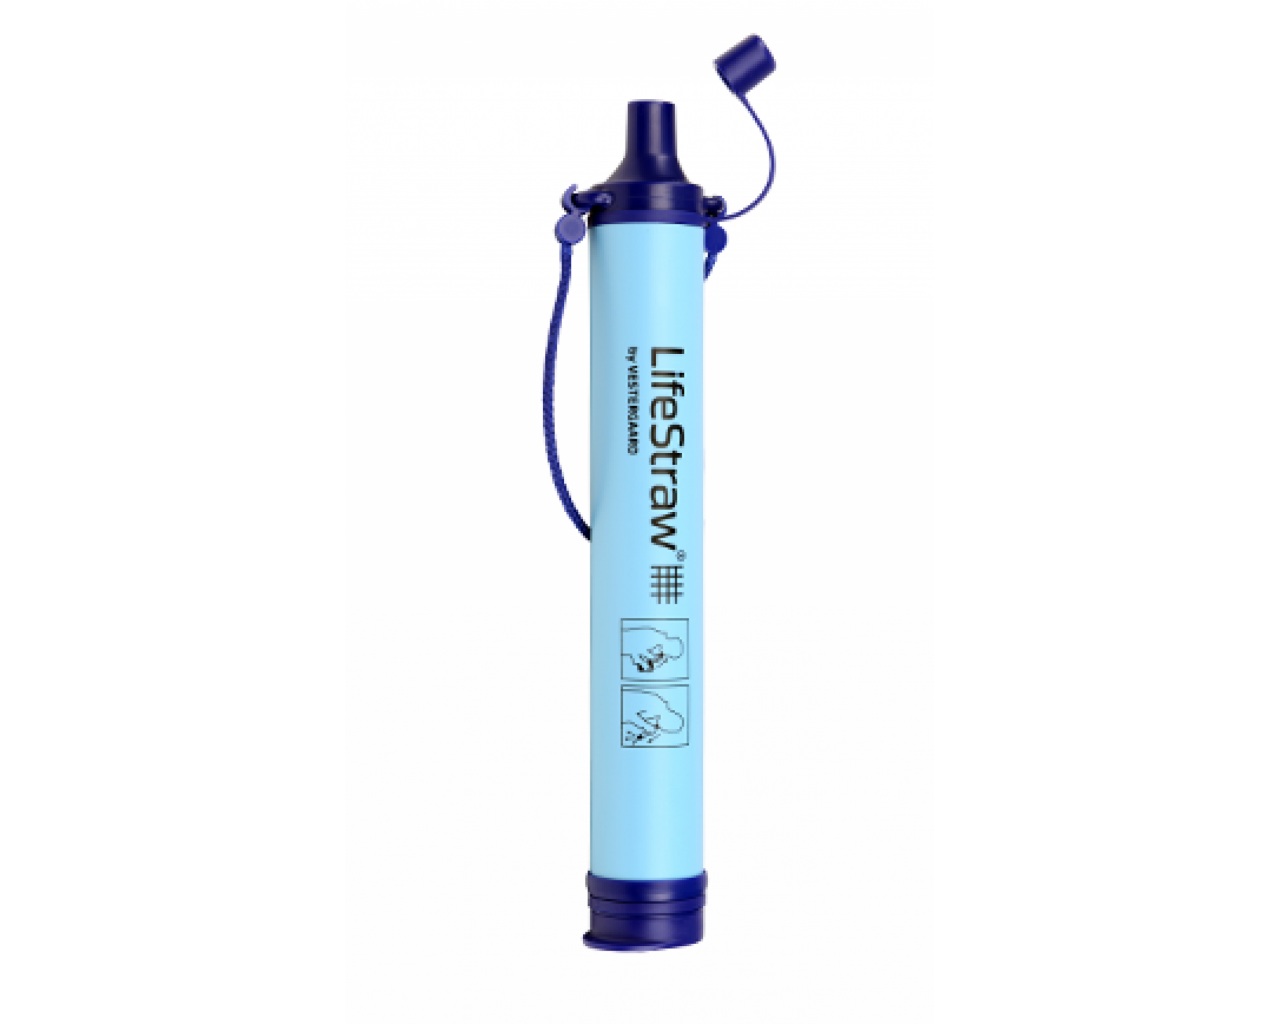 Lifestraw Personal water filter